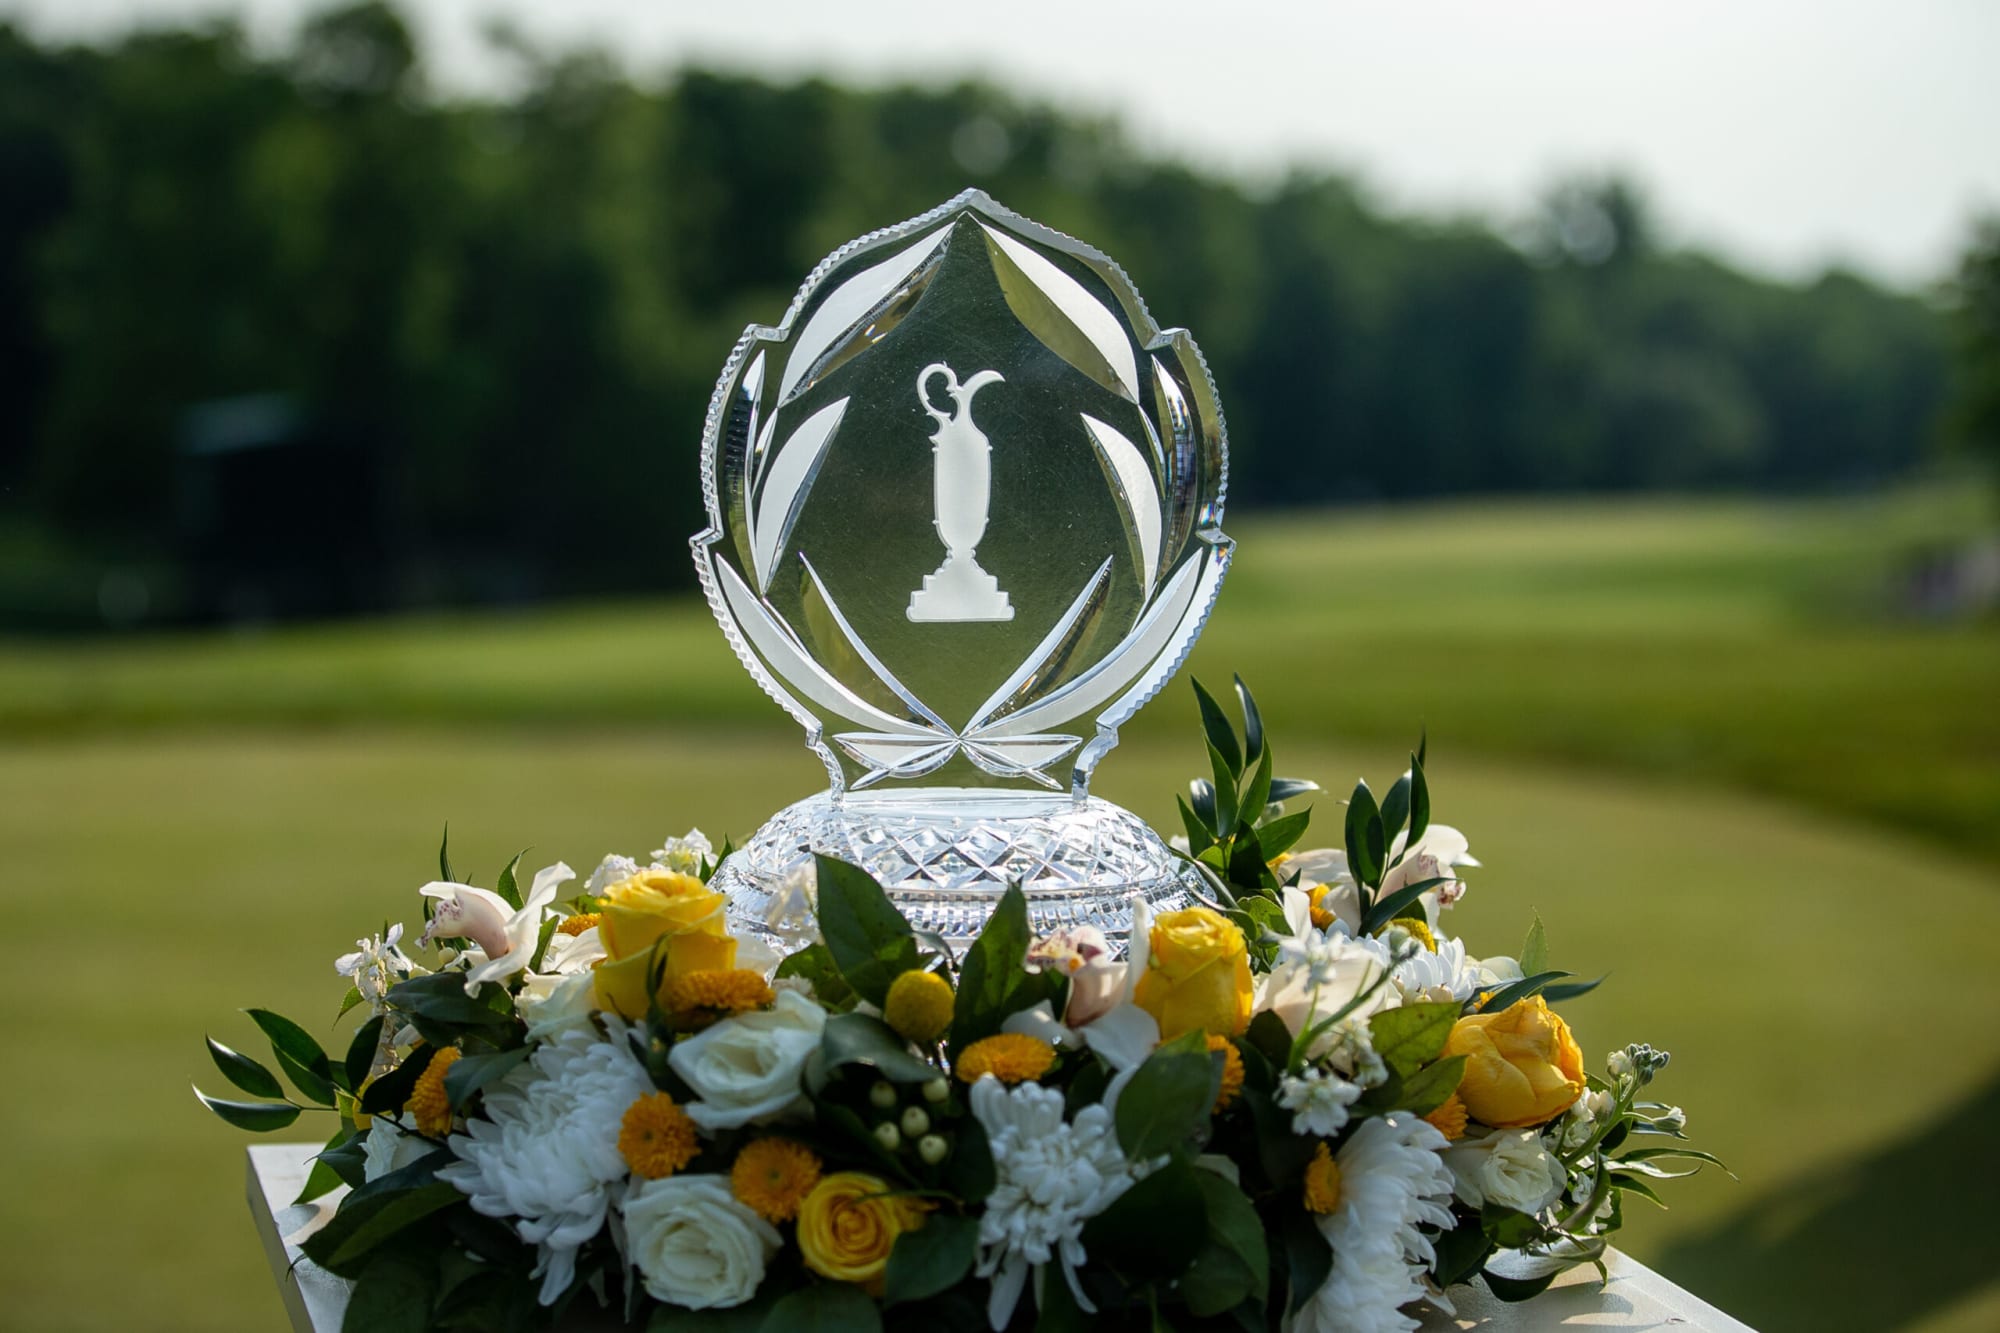 2023 Memorial Tournament Prize Purse and Payouts by Position